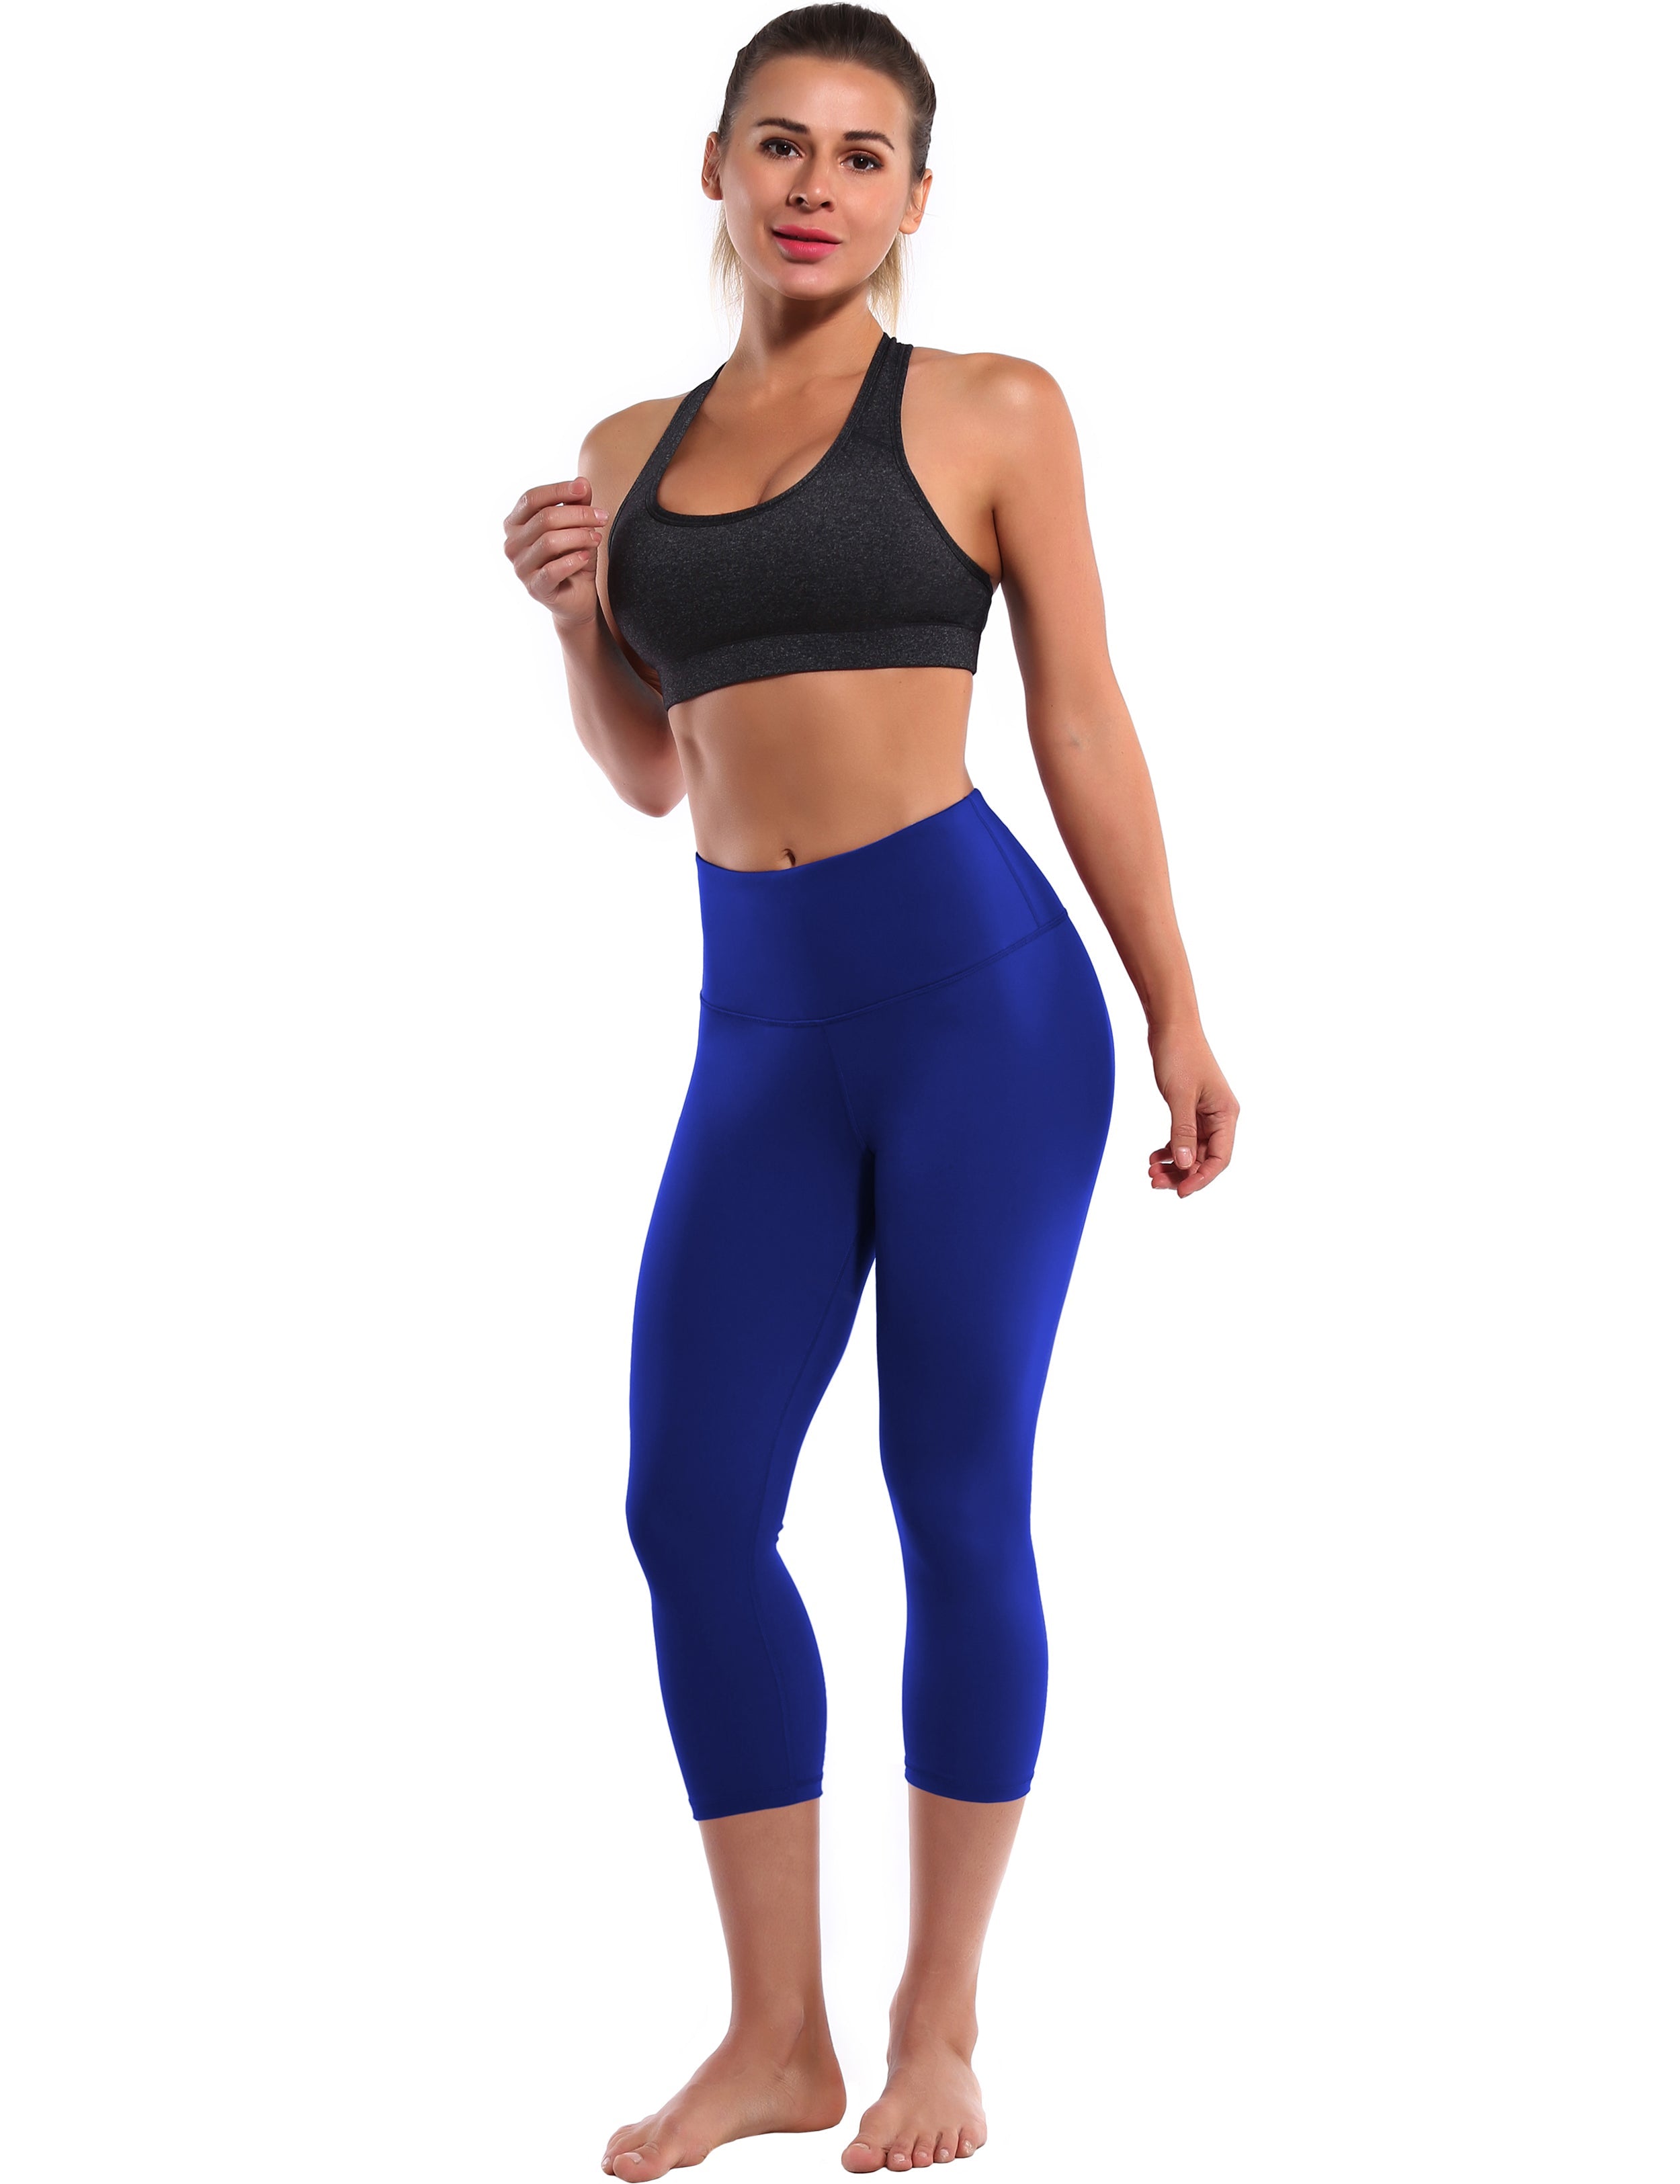 19" High Waist Crop Tight Capris navy 75%Nylon/25%Spandex Fabric doesn't attract lint easily 4-way stretch No see-through Moisture-wicking Tummy control Inner pocket